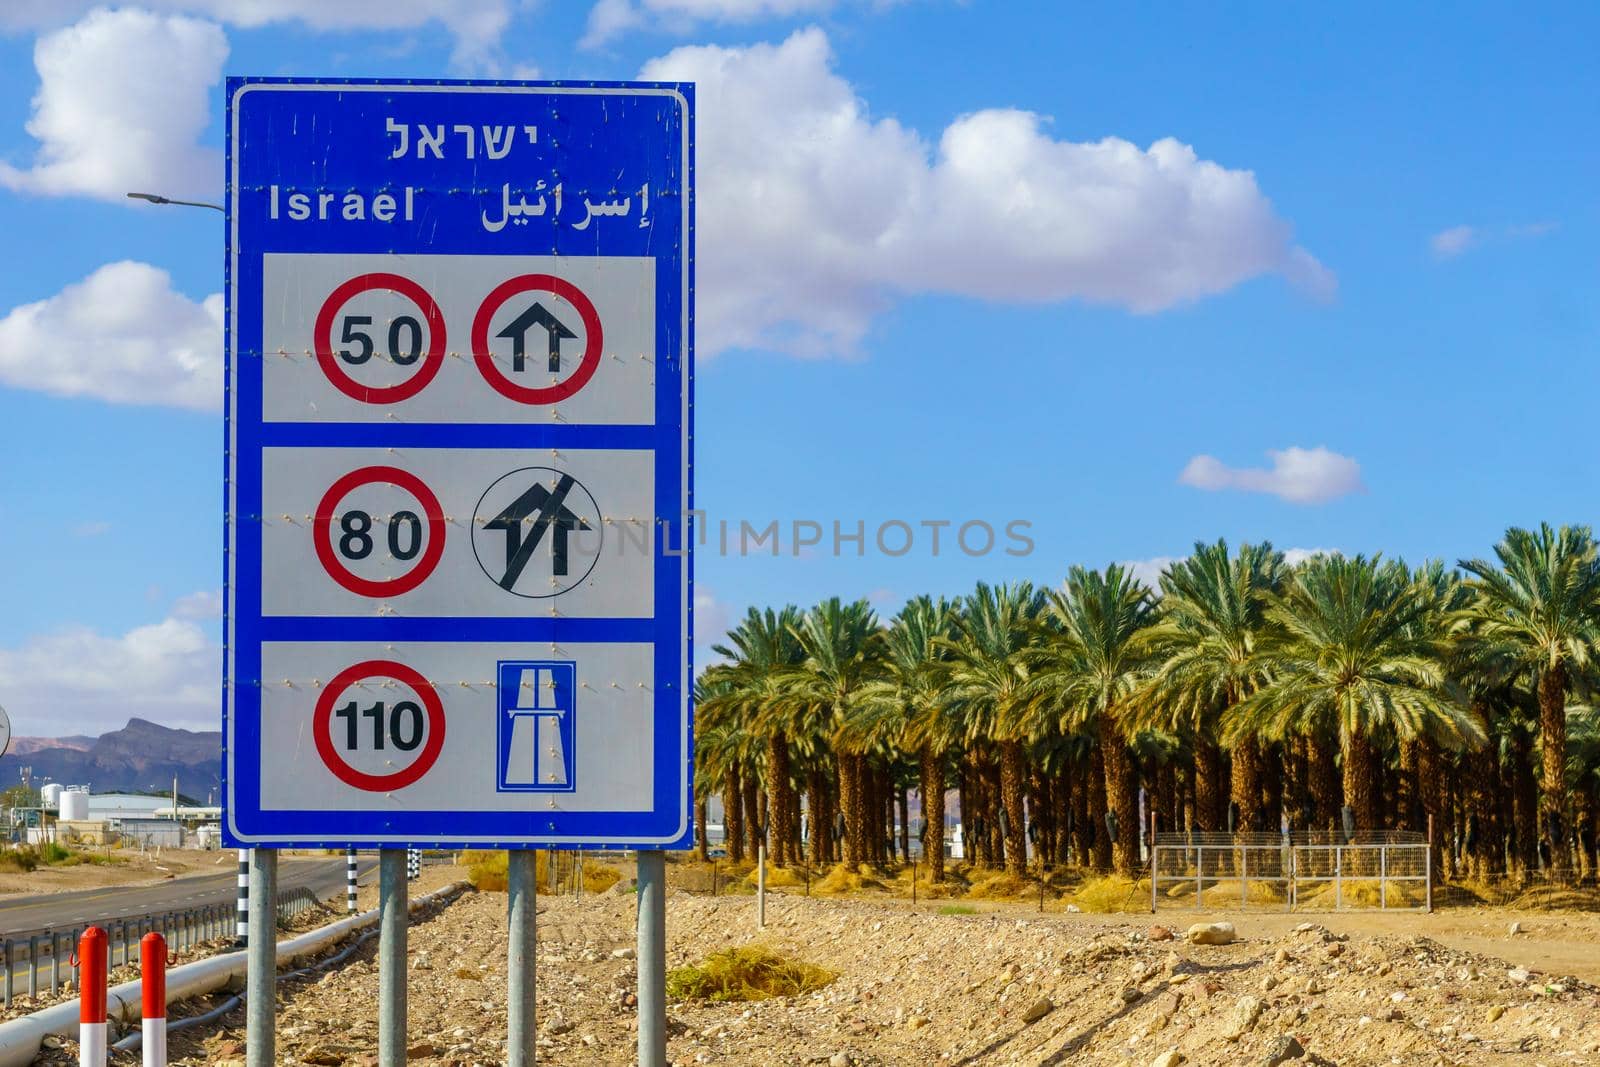 Welcome to Israel sign, with speed limits by RnDmS